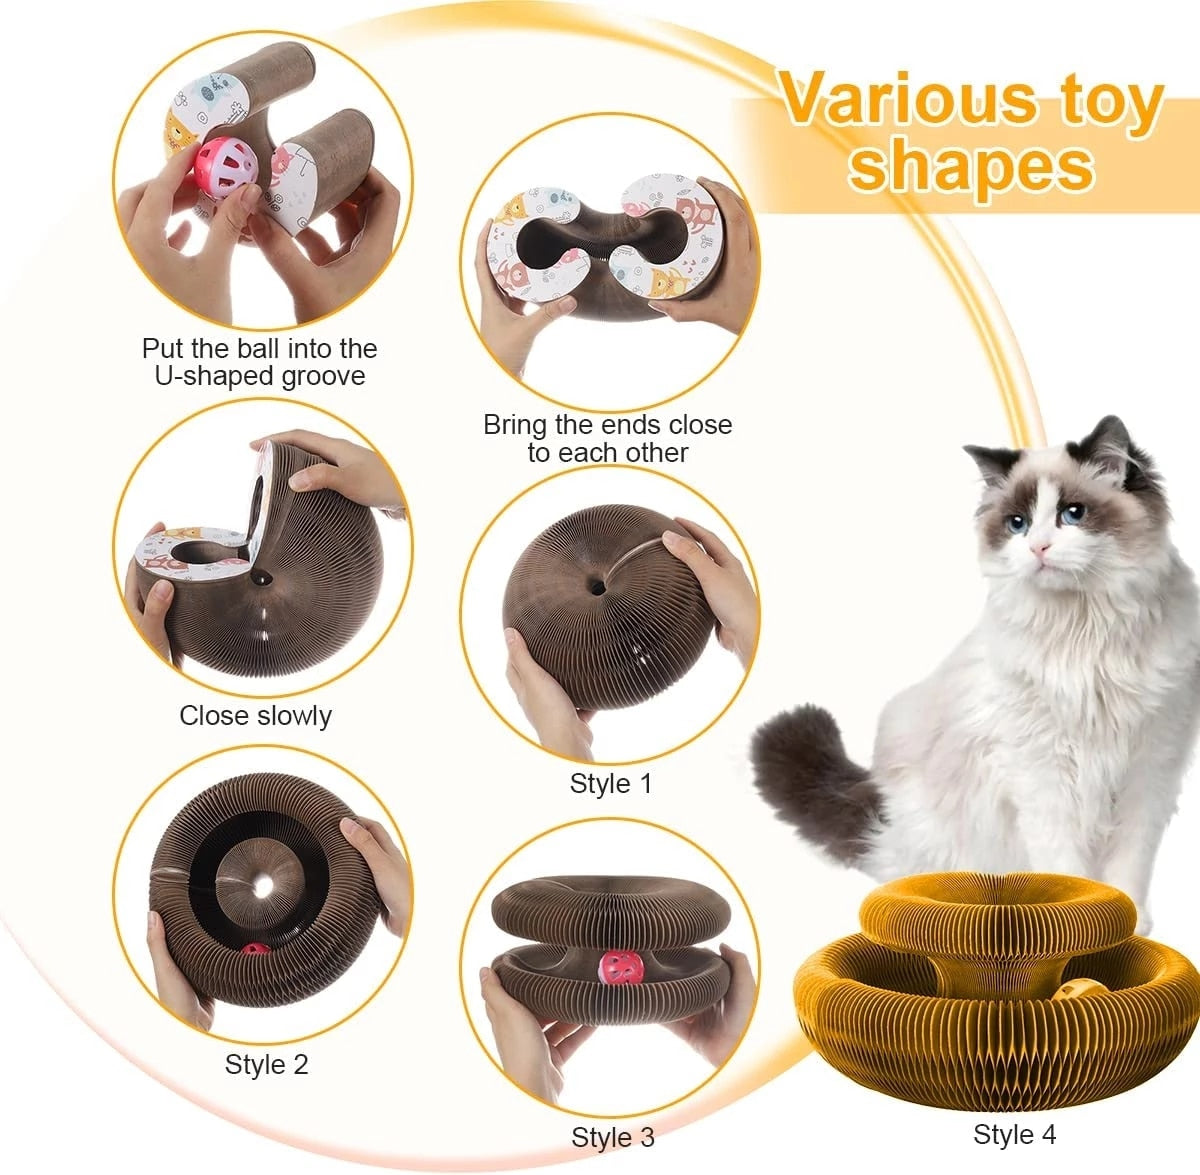 Magic Organ Cat Toy Cats Scratcher Scratch Board Round Corrugated Scratching Post Toys for Cats Grinding Claw Cat Accessories - integrityhomedecor